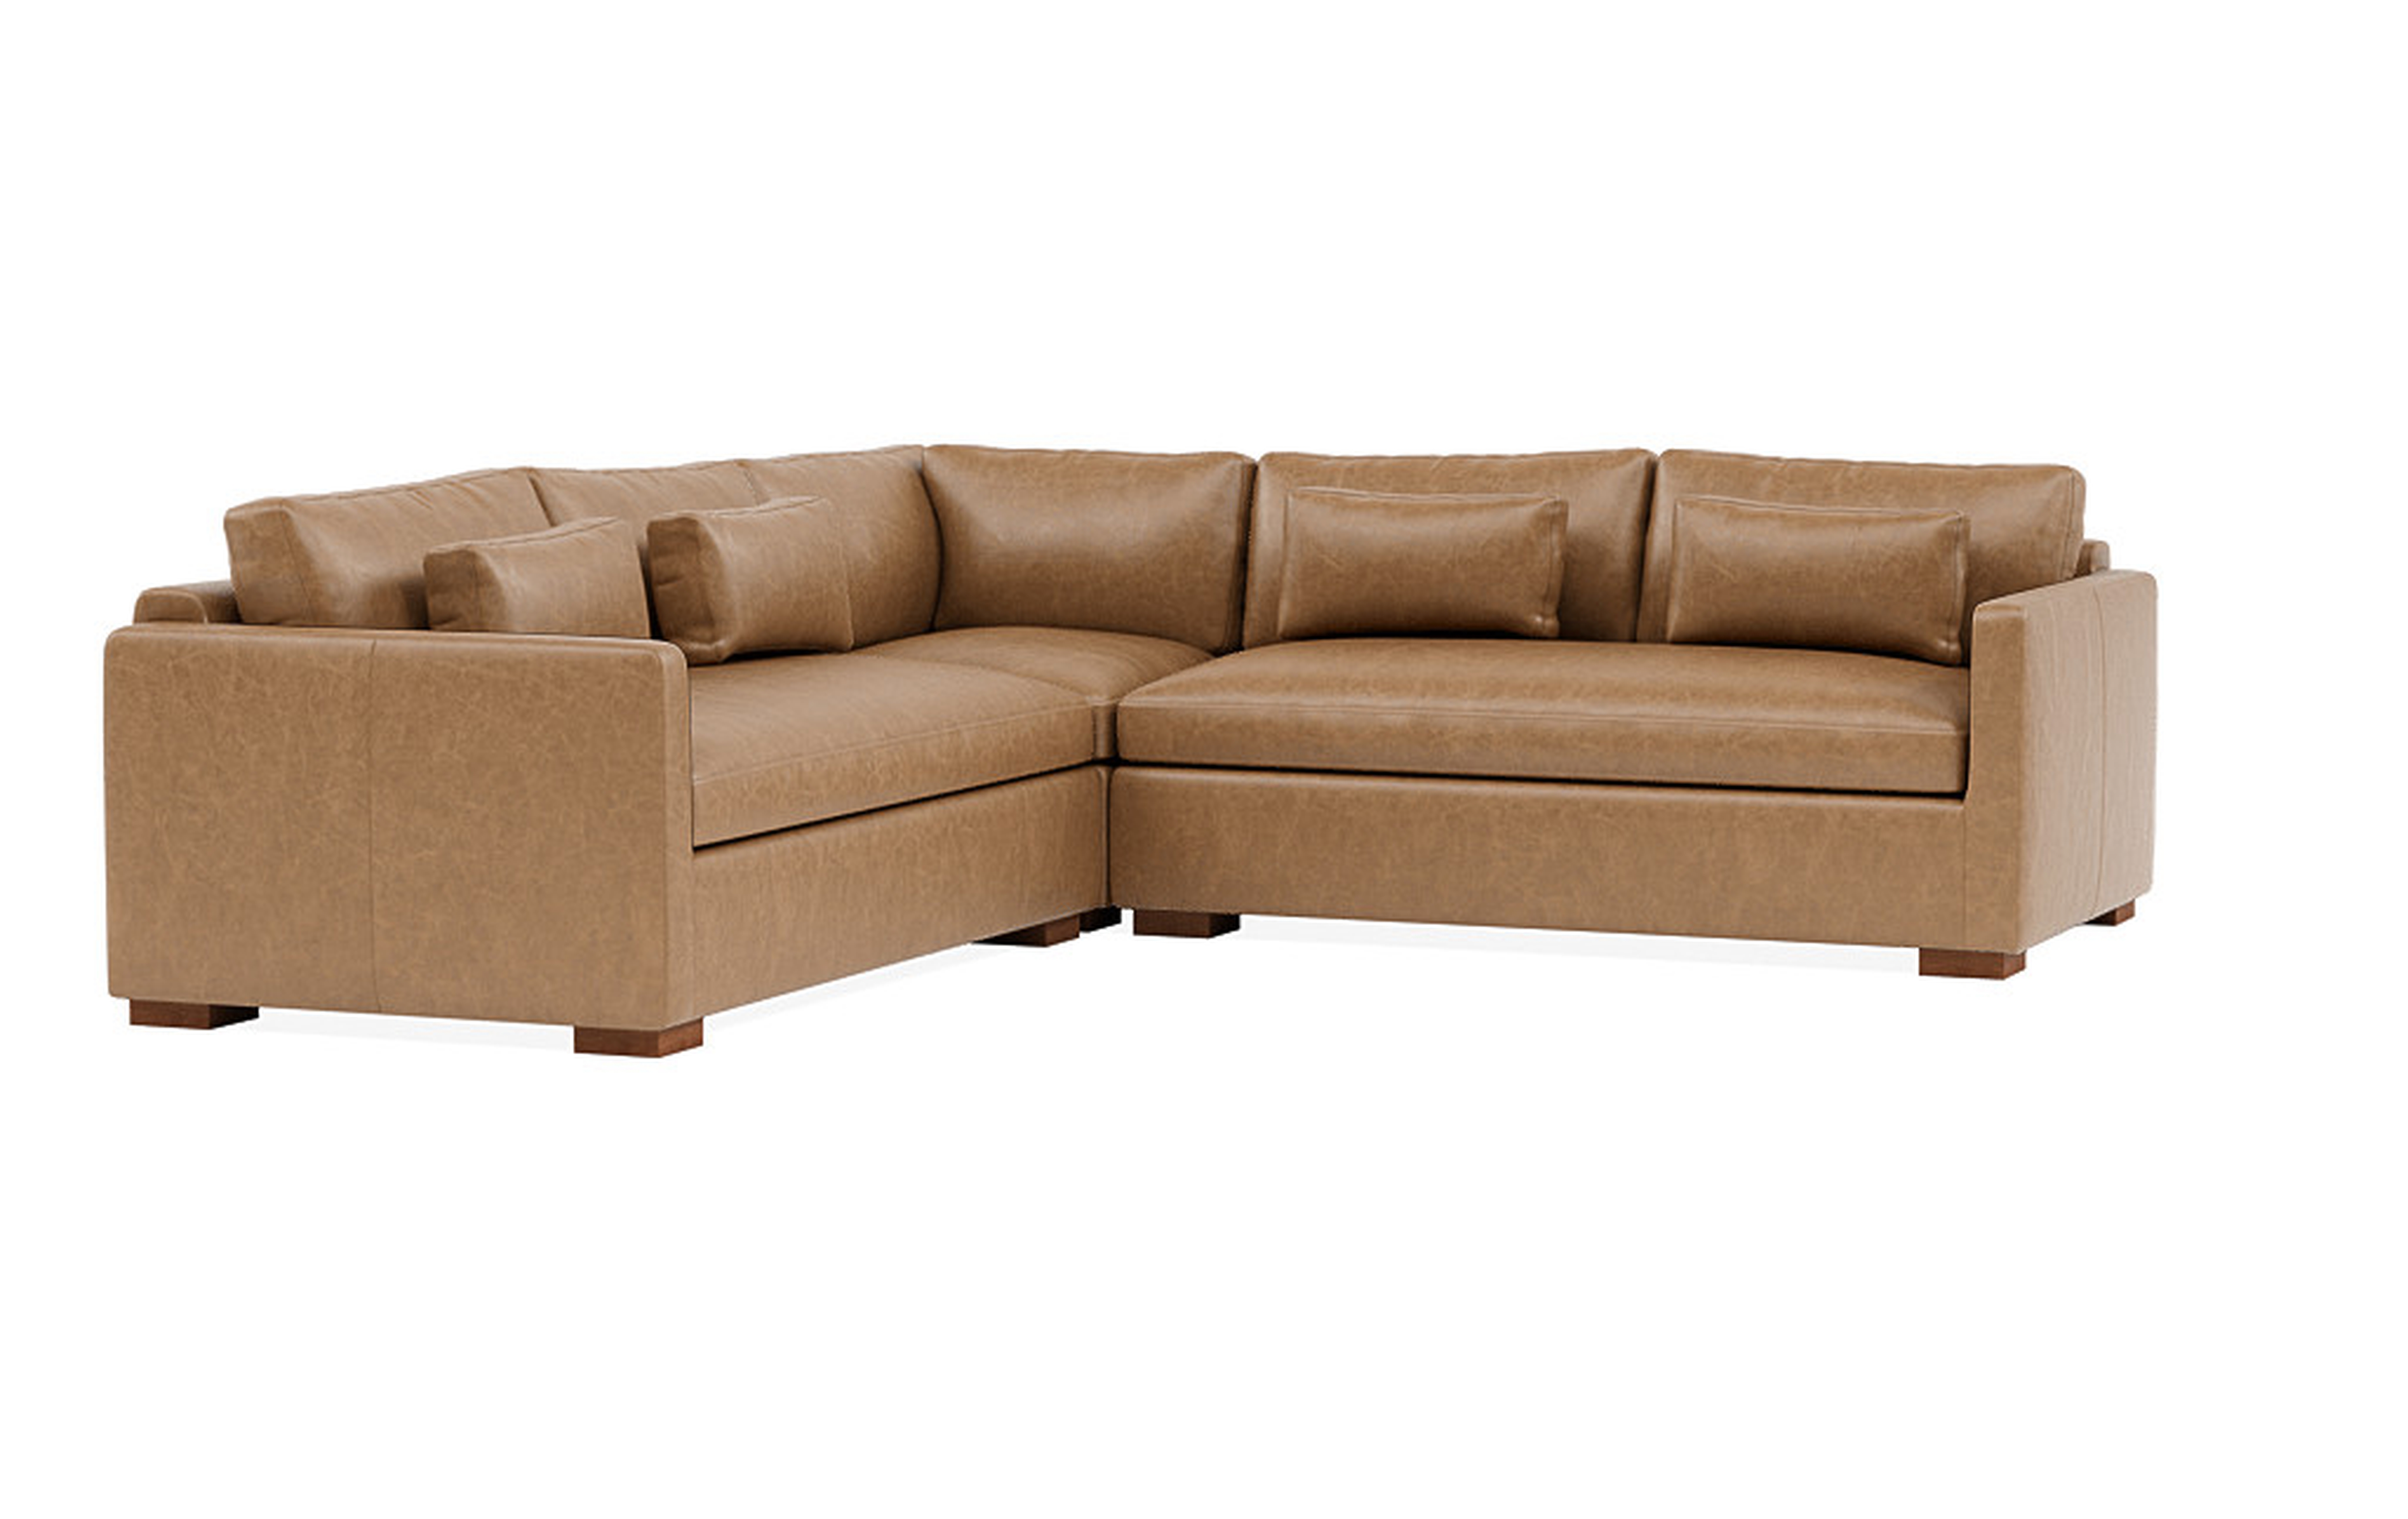 CHARLY LEATHER Leather Corner Sectional Sofa - Interior Define